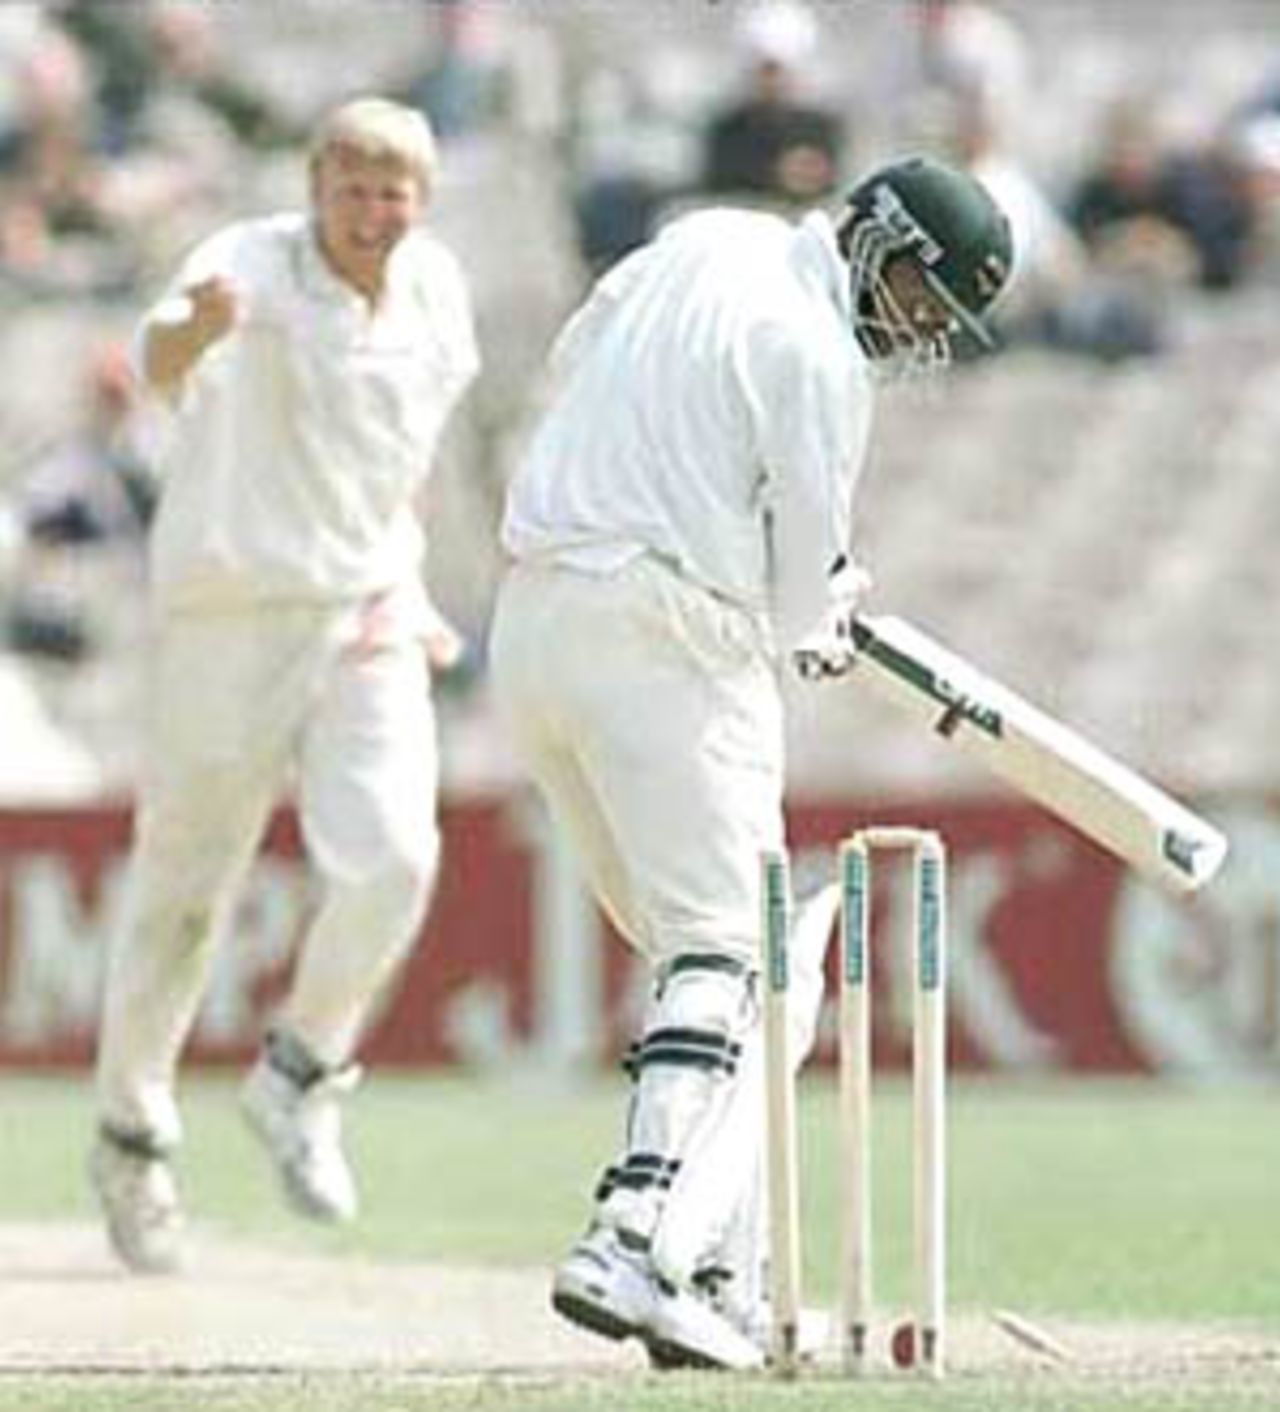 Phil Defreitas is bowled by Peter Martin, PPP healthcare County Championship Division One, 2000, Lancashire v Leicestershire Old Trafford, Manchester, 3-6 May 2000.